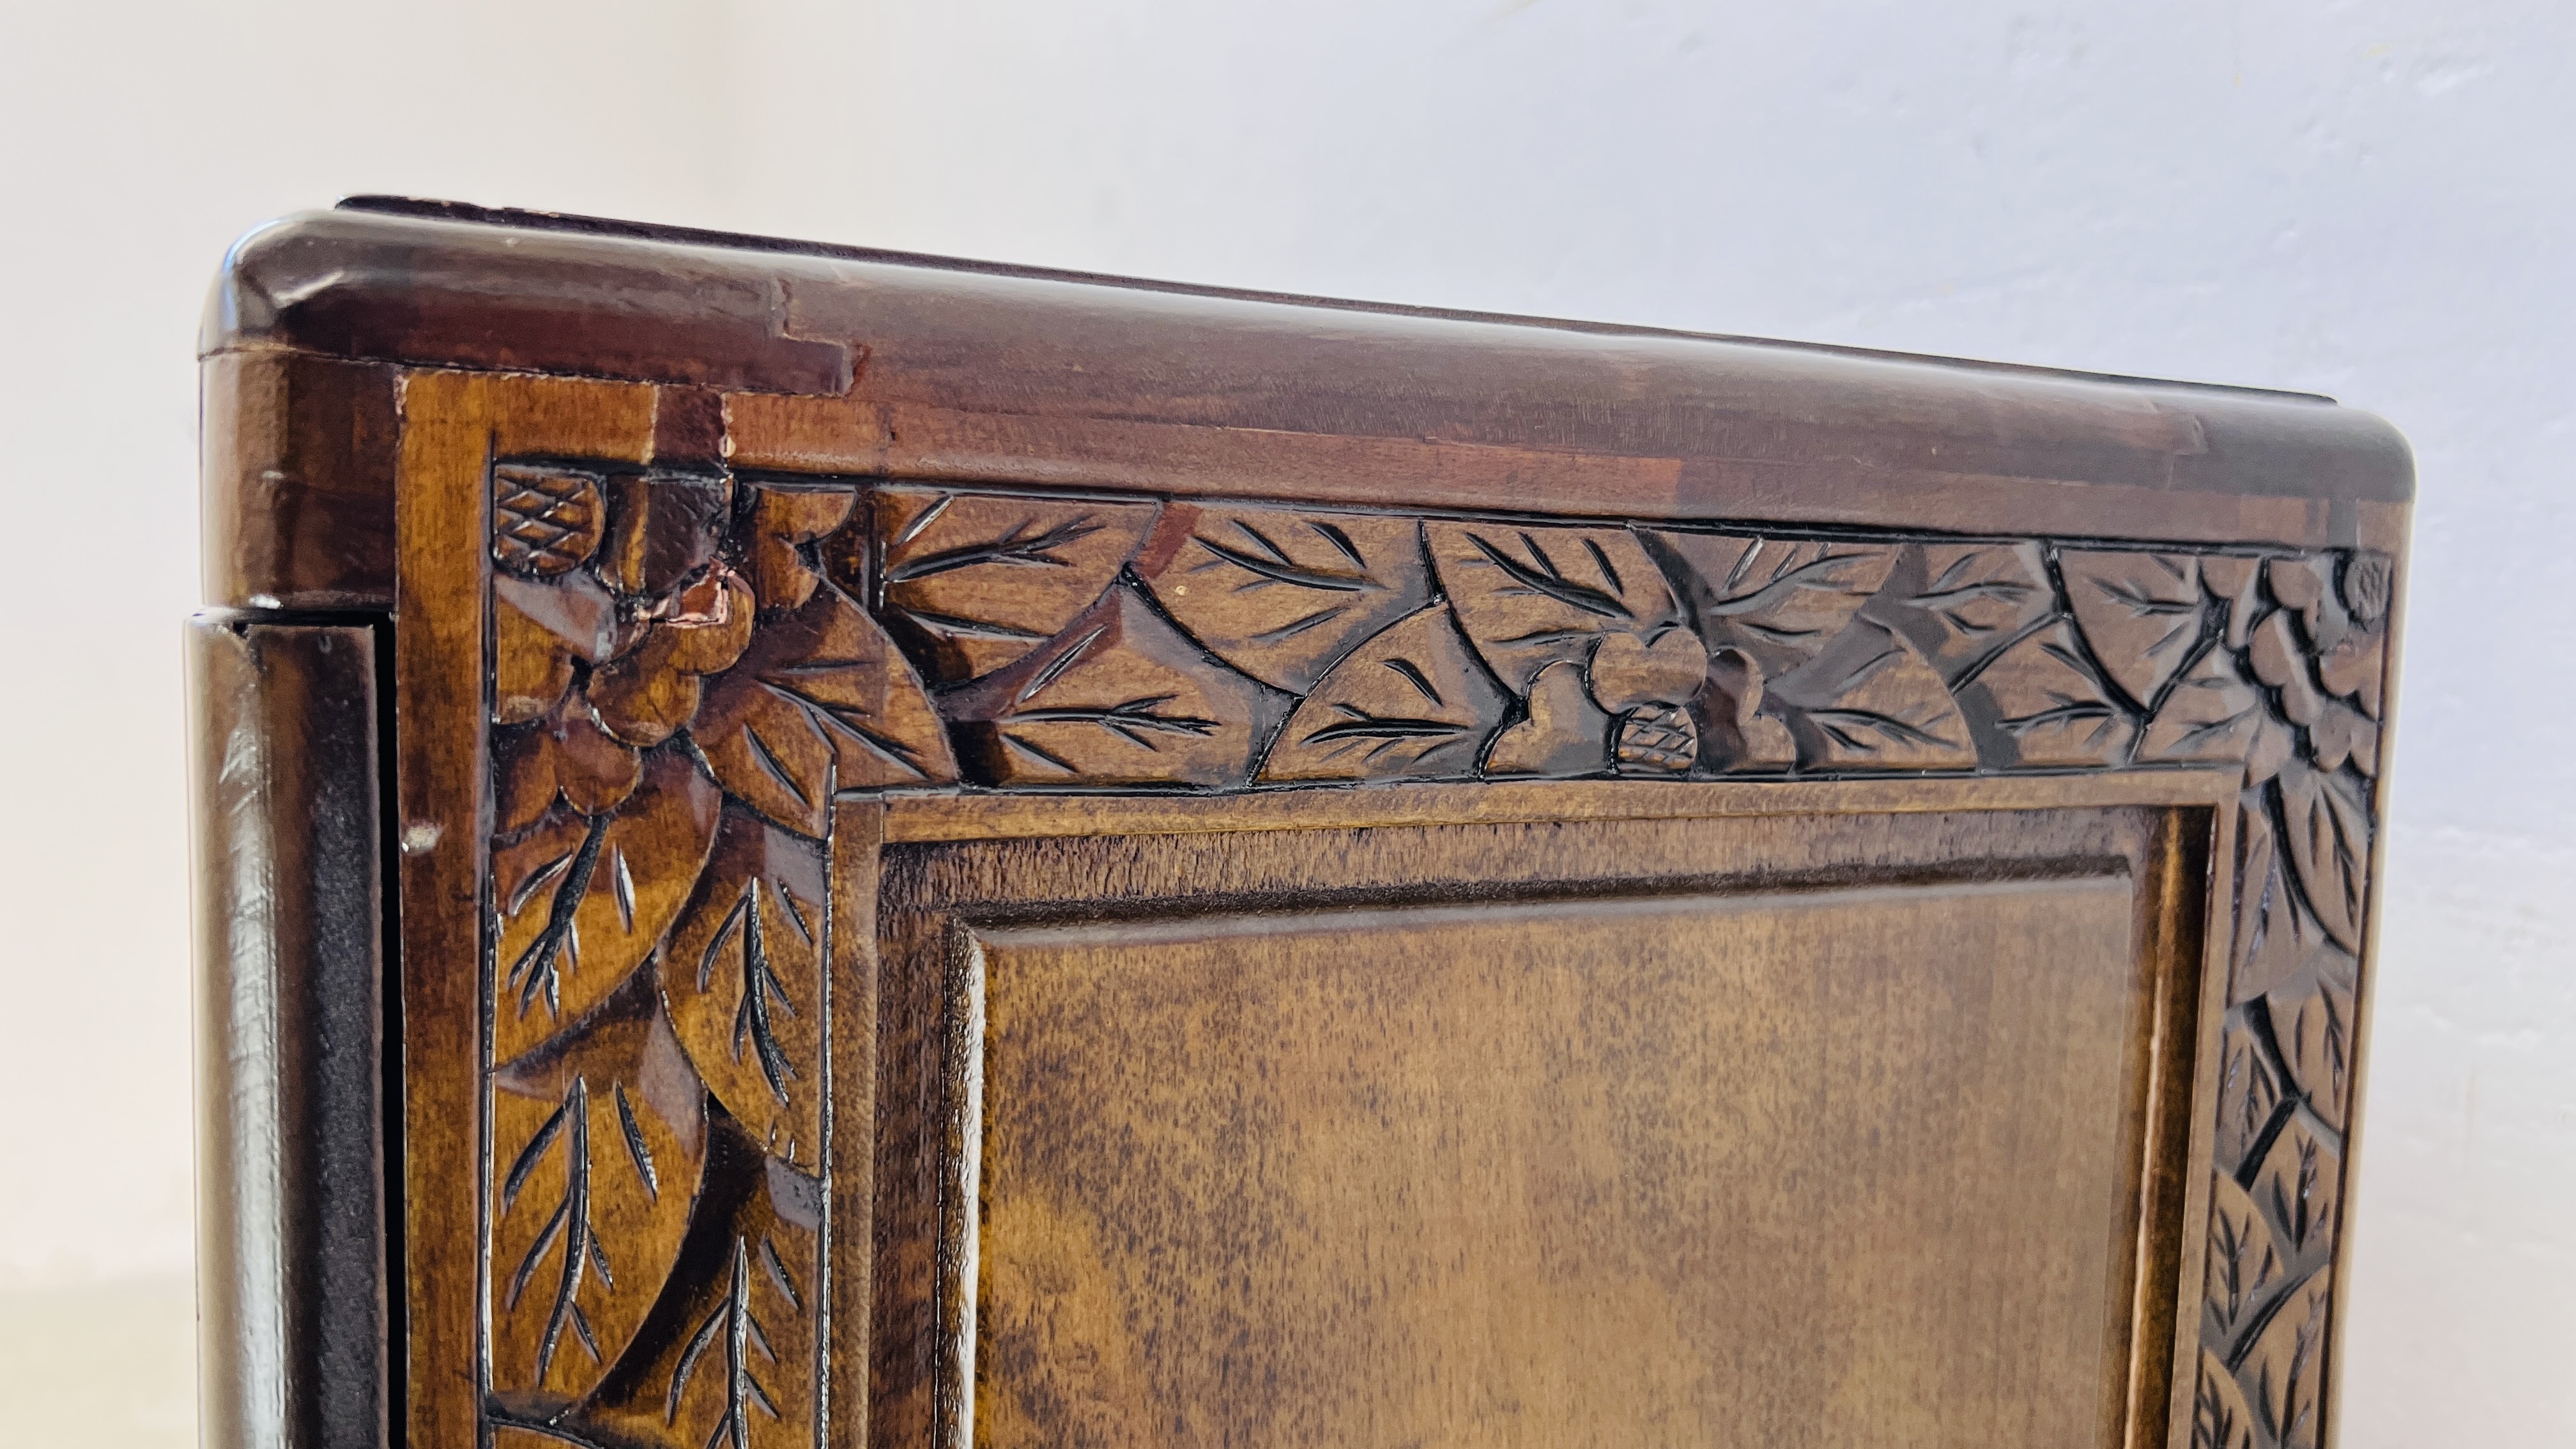 A 5 DRAWER HARDWOOD CHEST WITH A PAIR OF STALKS CARVED TO TOP AND FLORAL DECORATION CARVING - W - Image 7 of 11